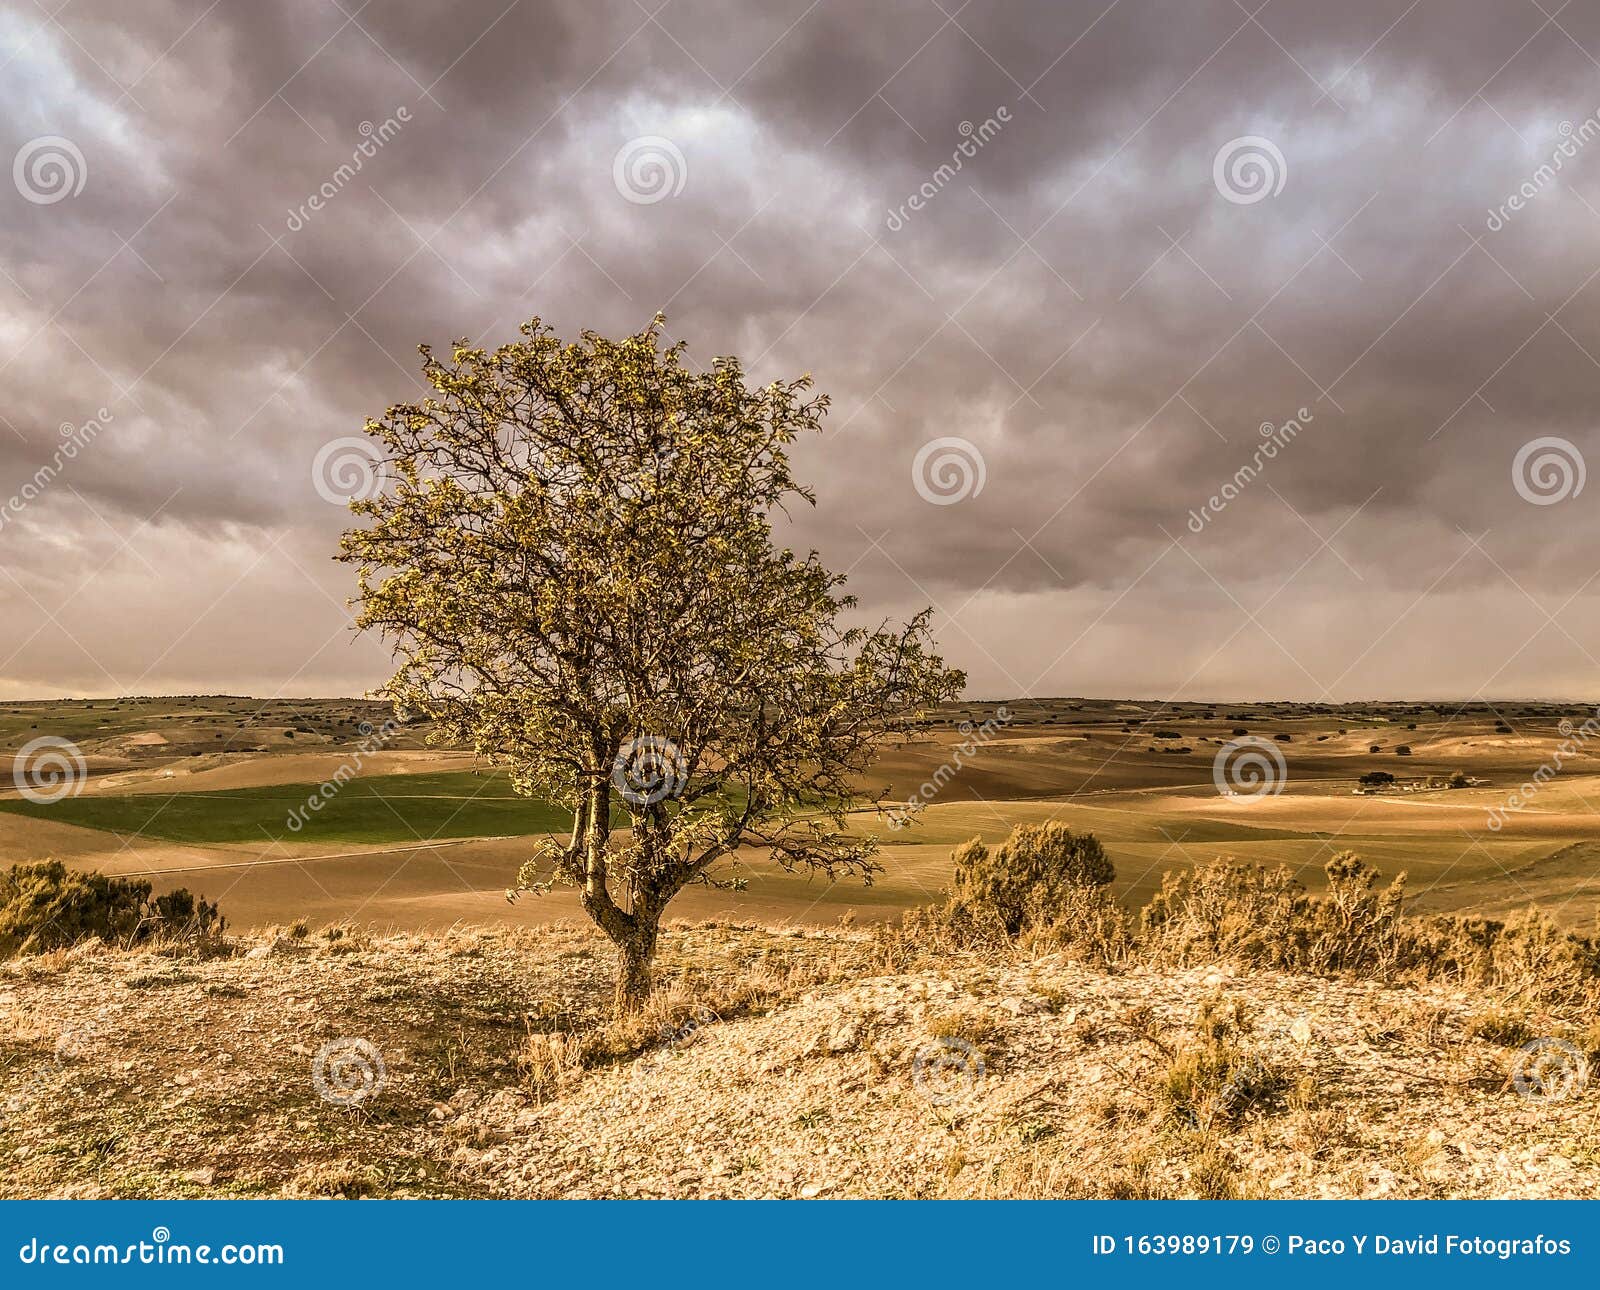 tree high up in the toledo steppe in autumn